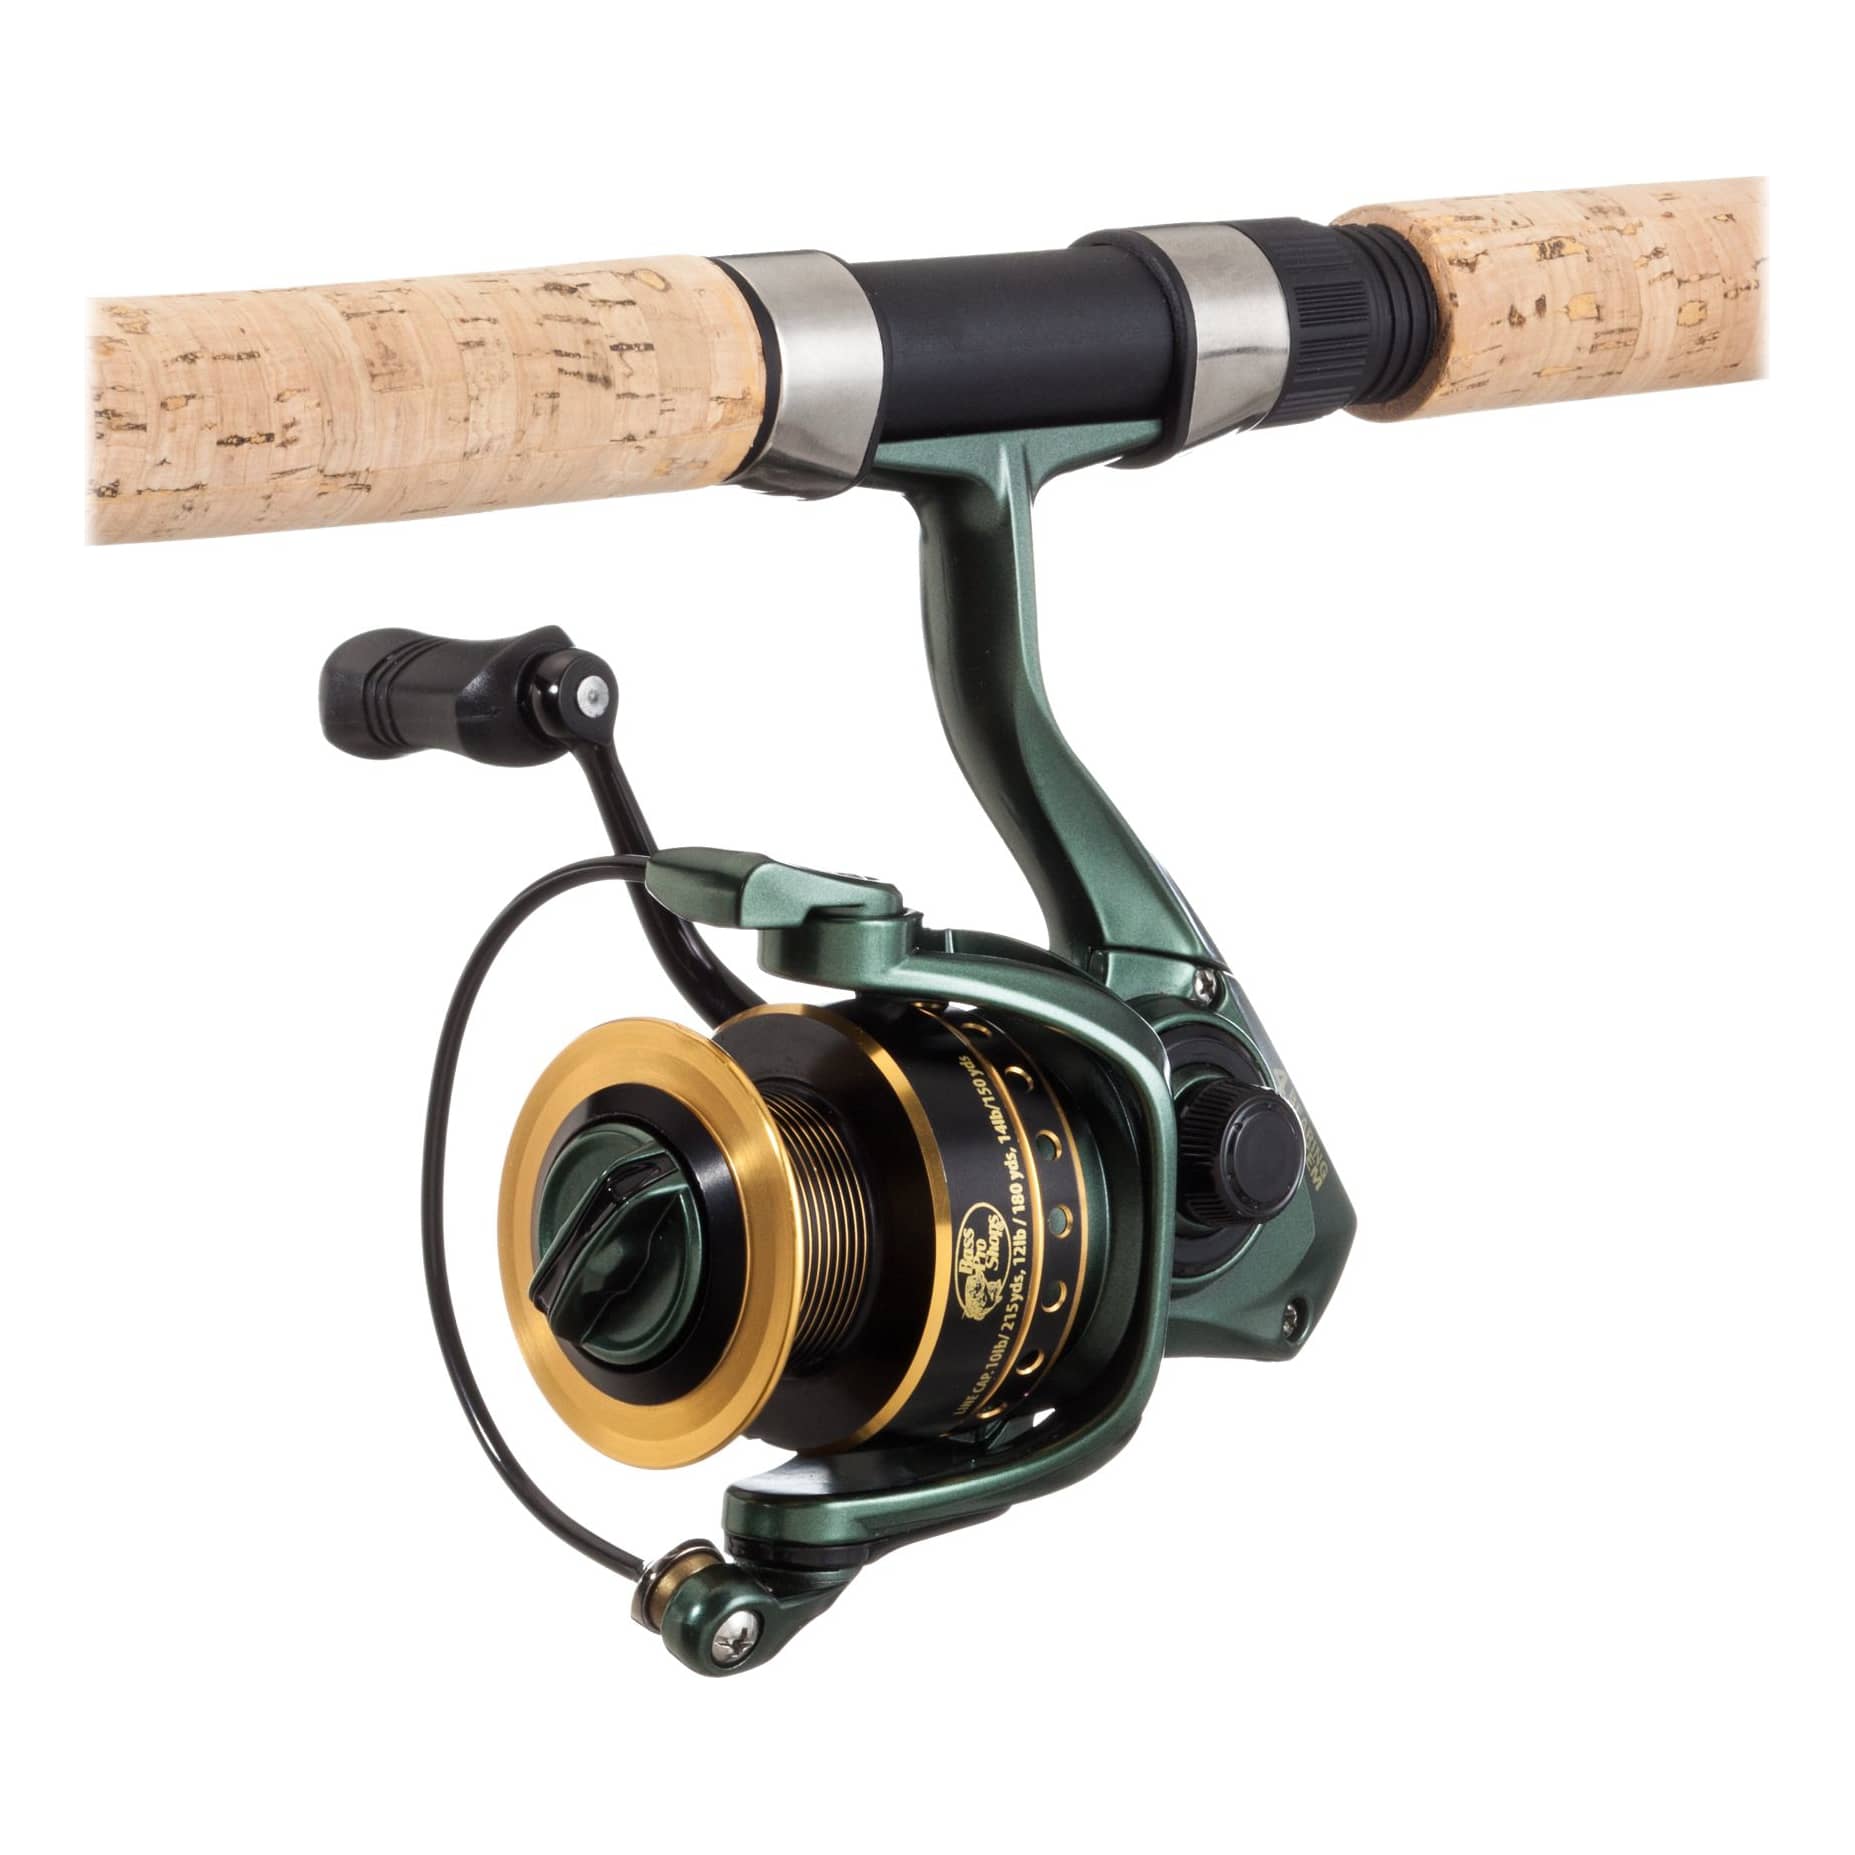 Bass Pro Shops Borealis Rod And Reel Spinning Combo